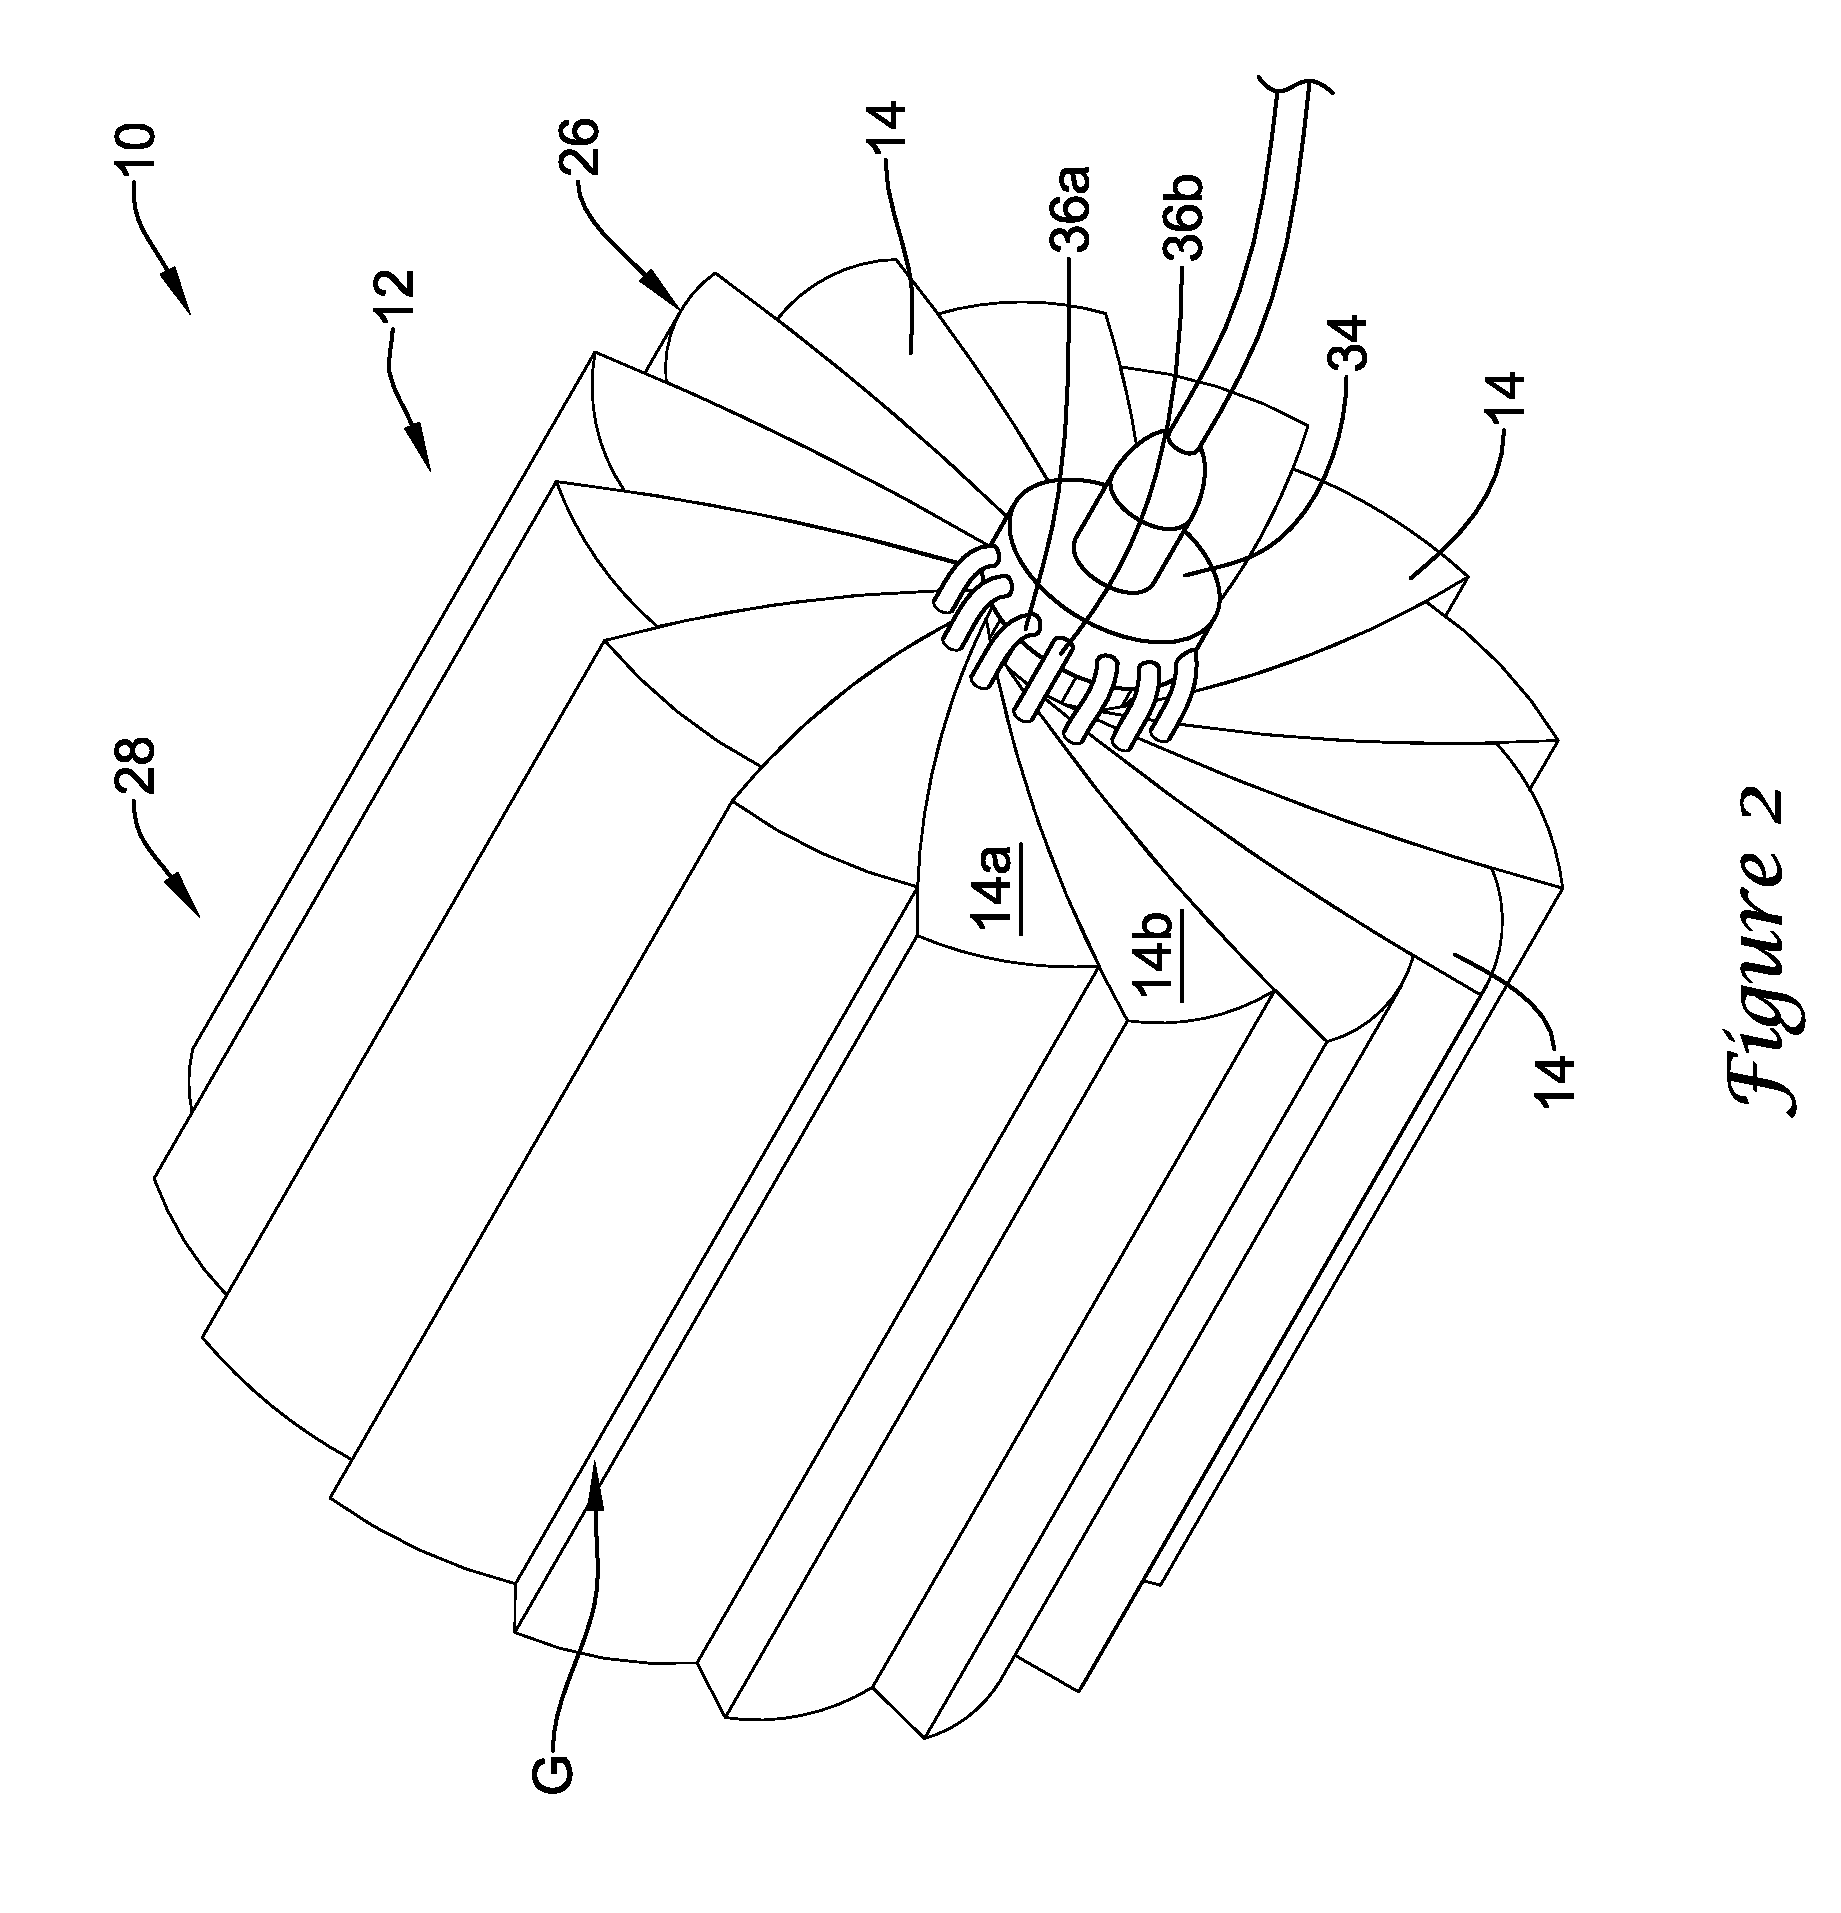 Methods for abluminally coating medical devices